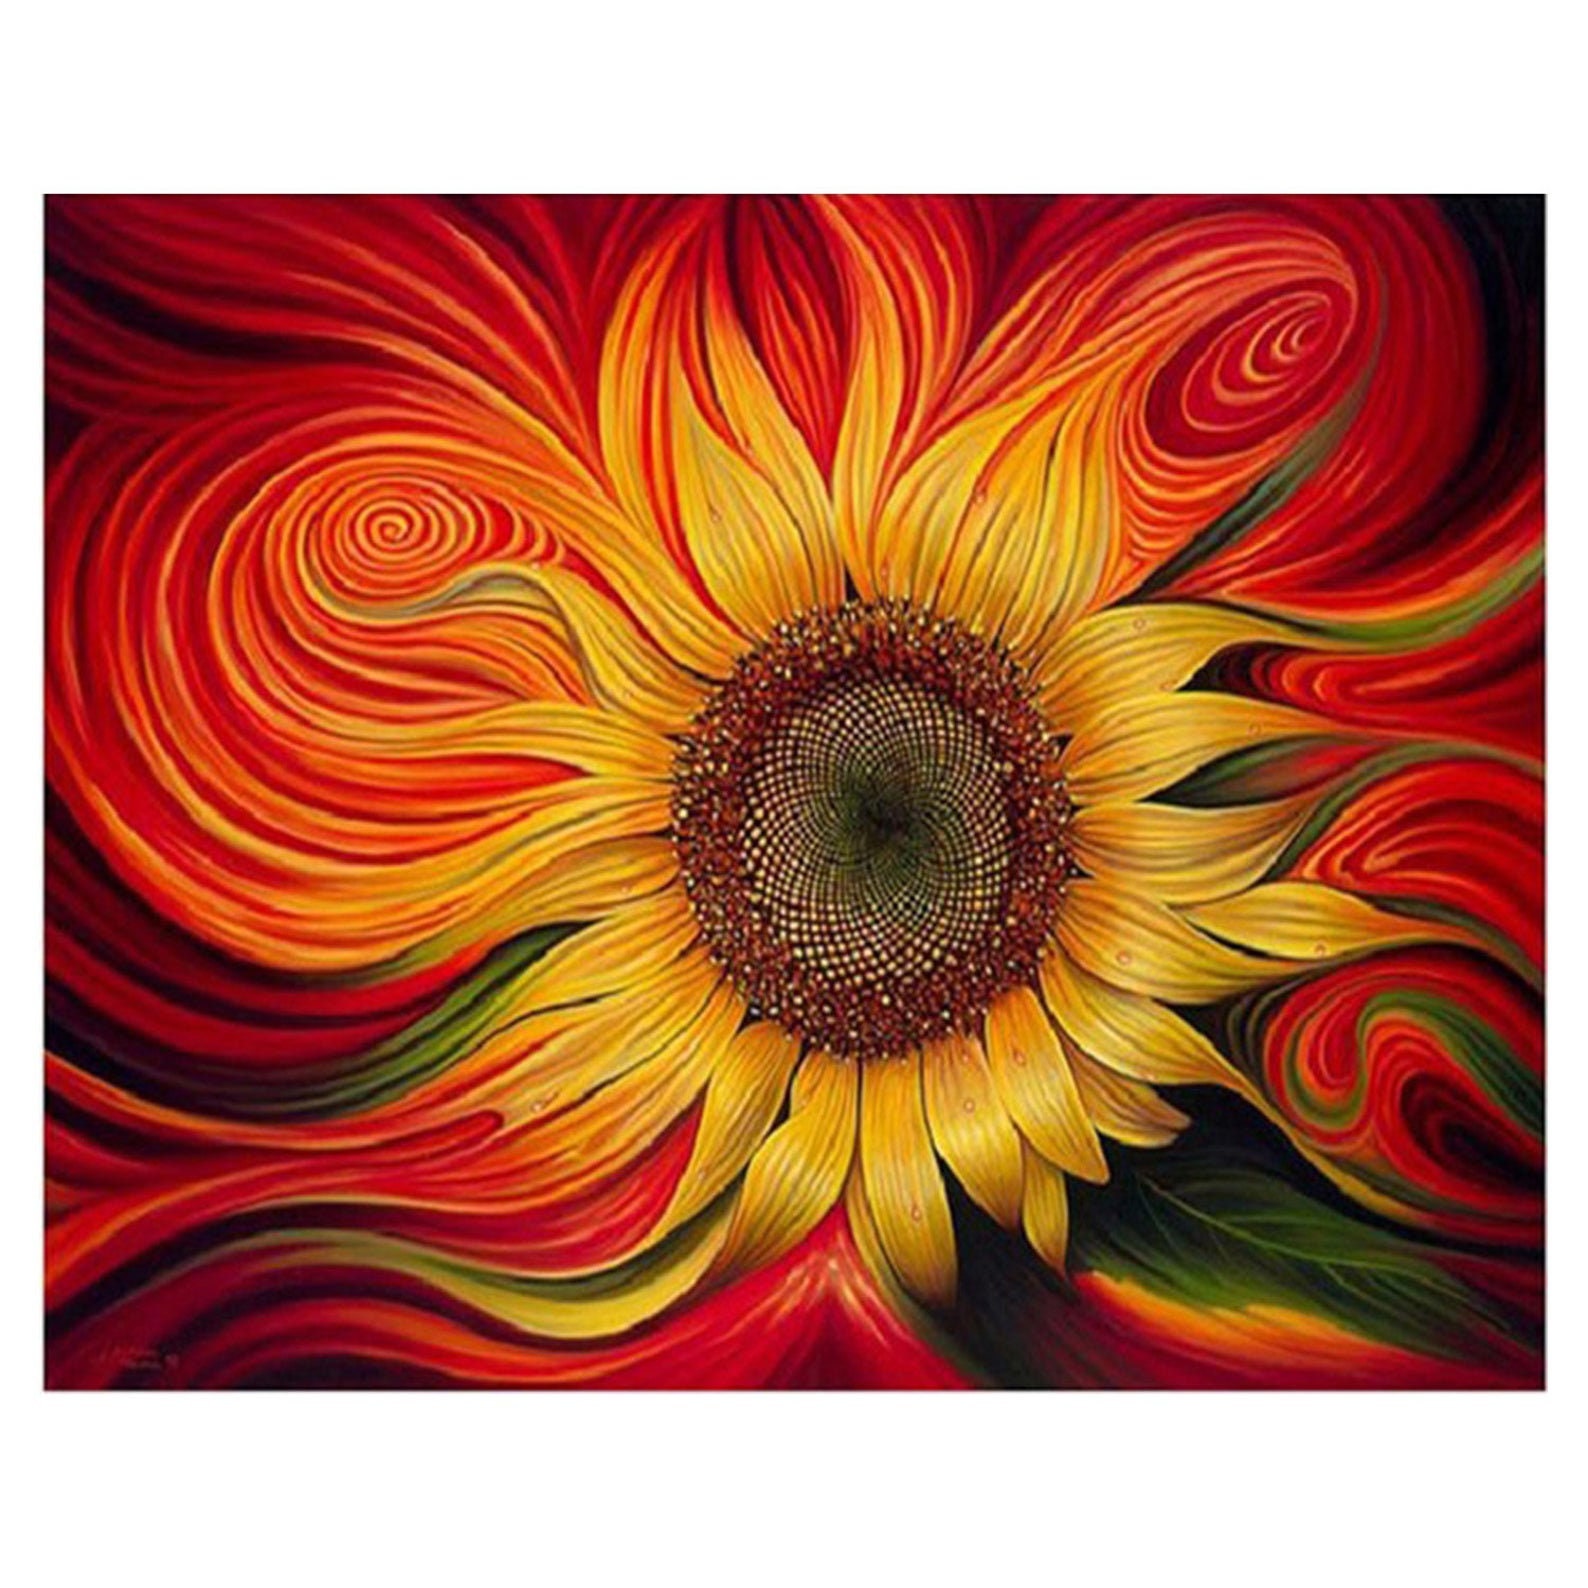 Diamond Art | 5D Diamond Painting Kits | Abstract Sunflower House Kit with 28-Facet, Resin Square Diamonds, Thick Canvas Plus Tools | DIY Crafts for